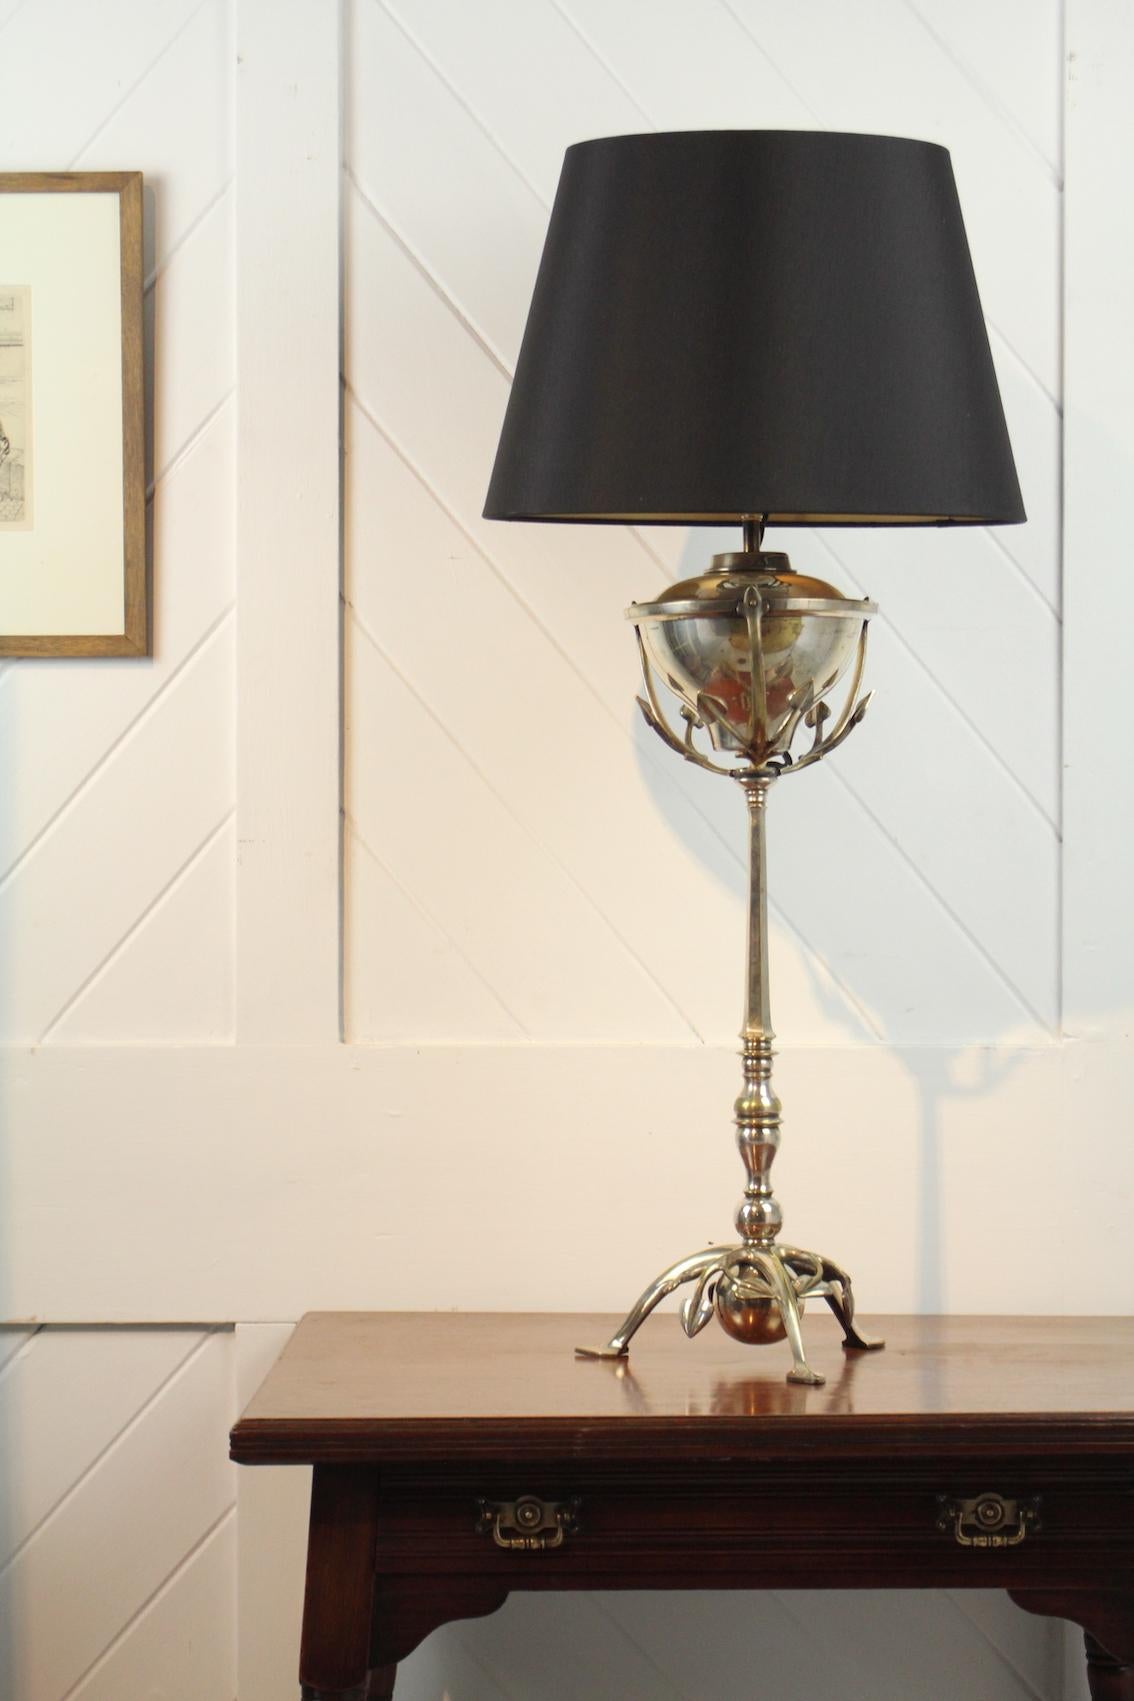 English Arts & Crafts Table Lamp by W.A.S. Benson